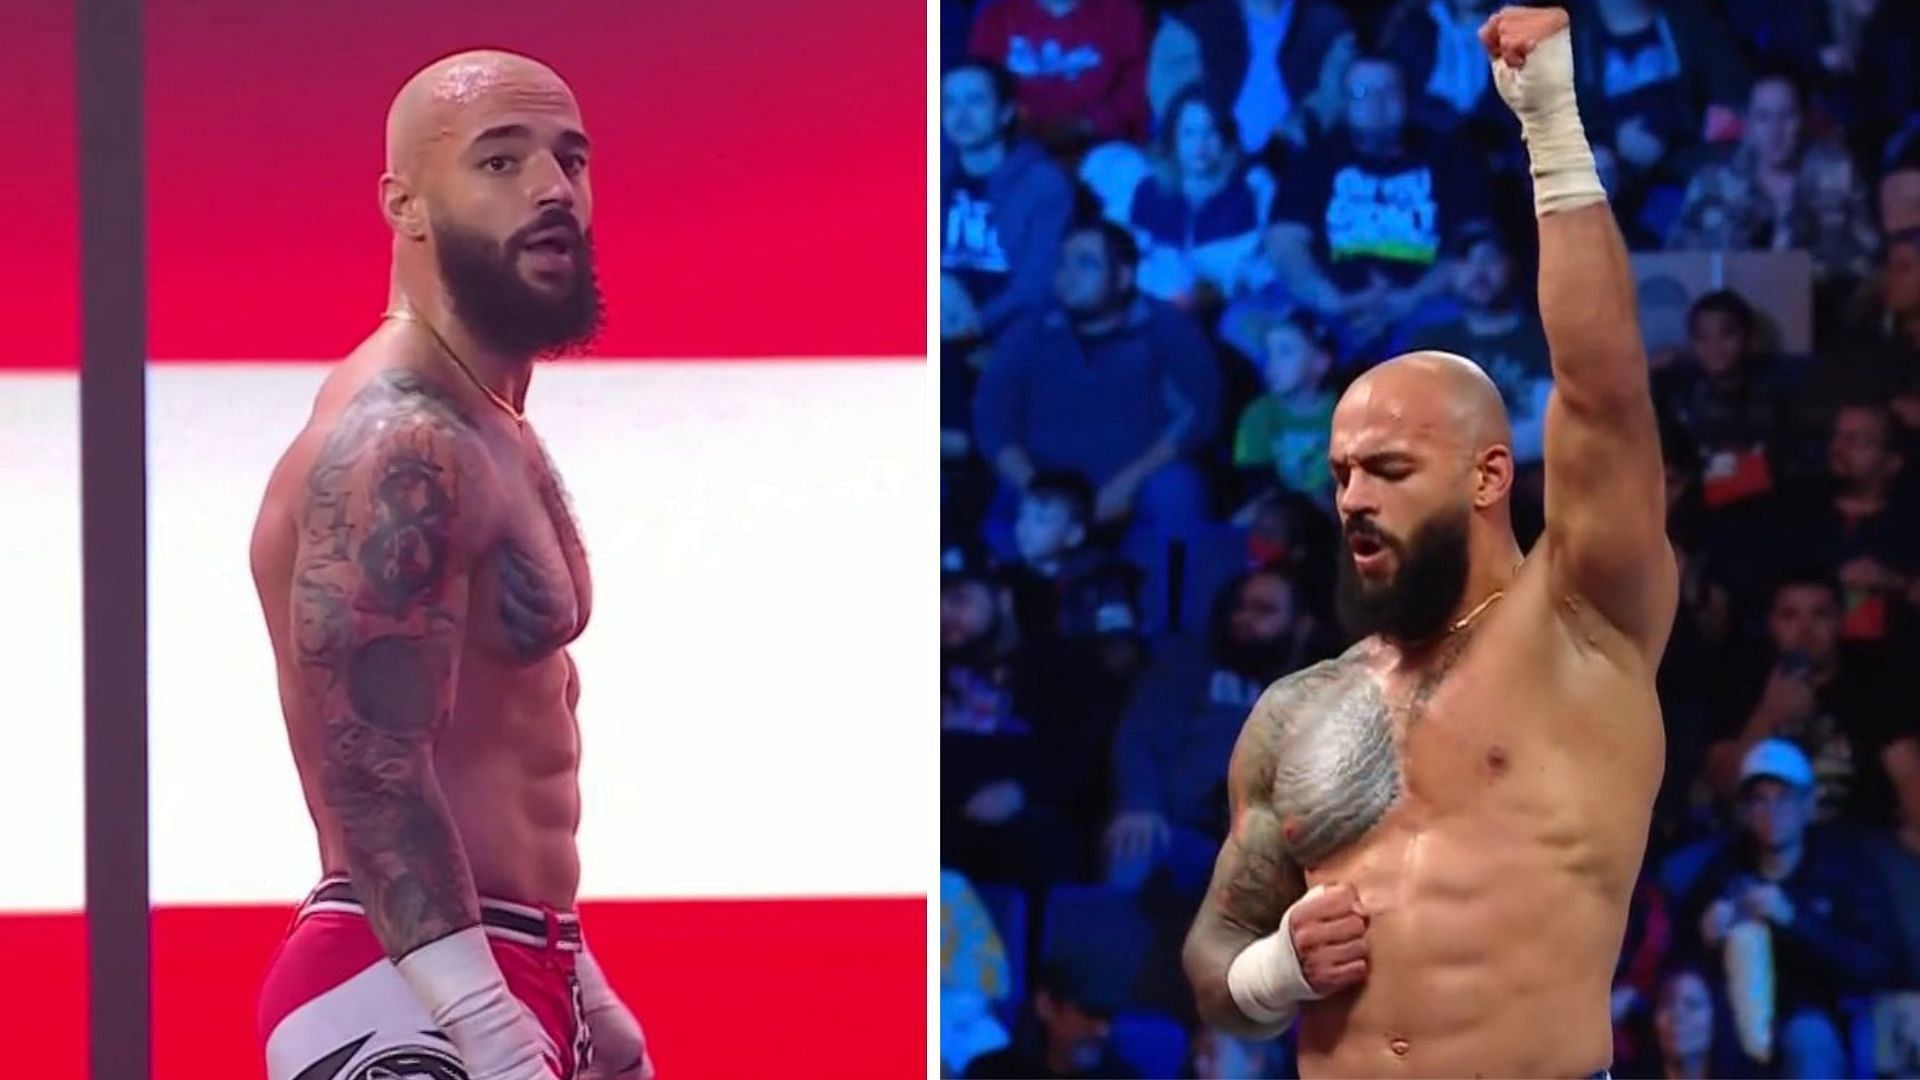 Ricochet has advanced to the finals of the SmackDown World Cup next week